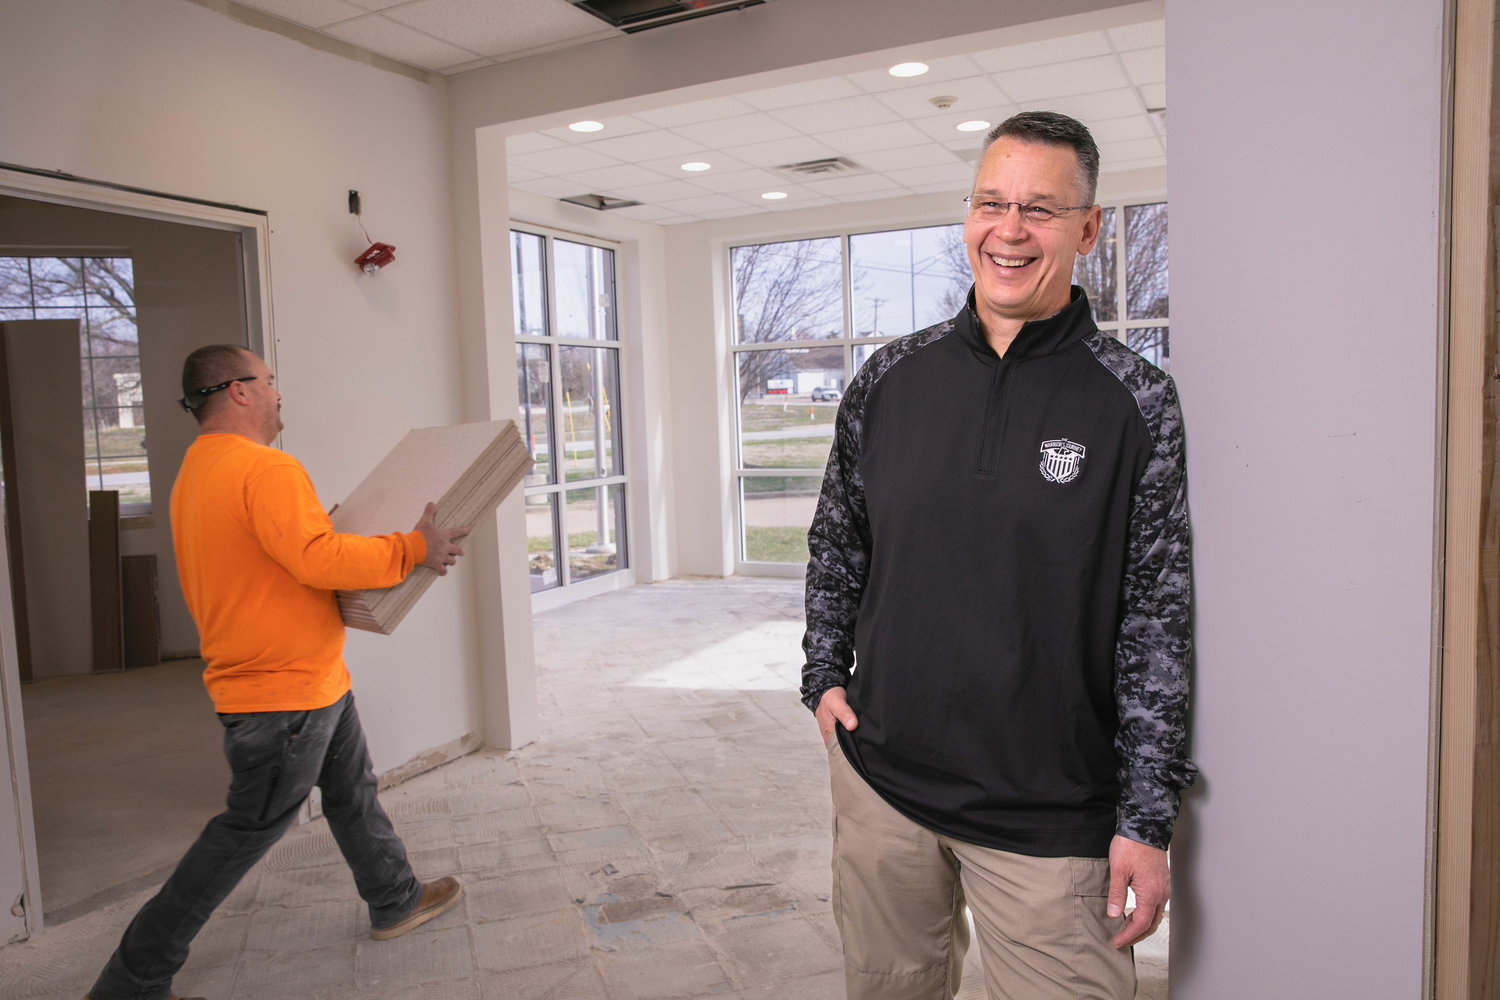 Kevin Weaver, president/CEO of The Warrior's Journey, stands amid renovations for the nonprofit's new headquarters.